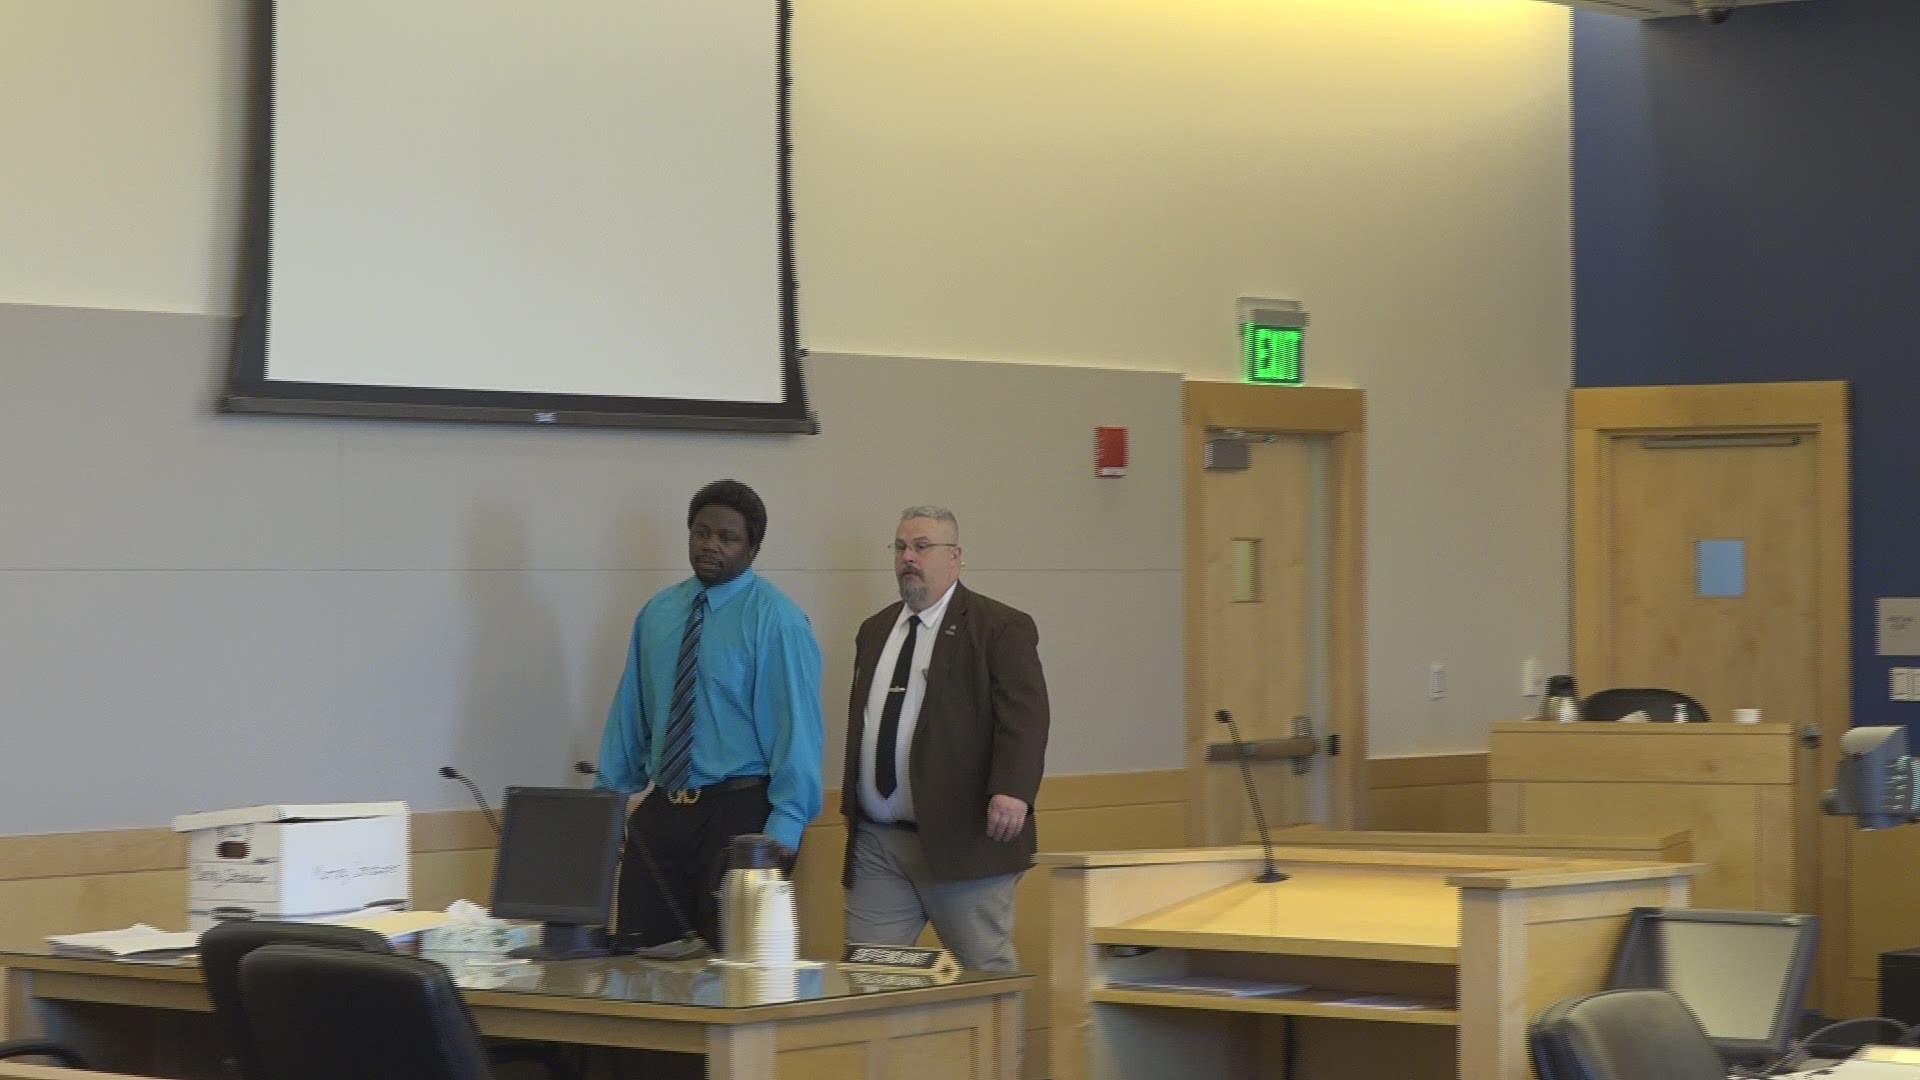 Christopher Murray went to trial Monday for a 2017 Millinocket home invasion that resulted in the murder of Wayne LaPierre and serious injury of Diem LaPierre.